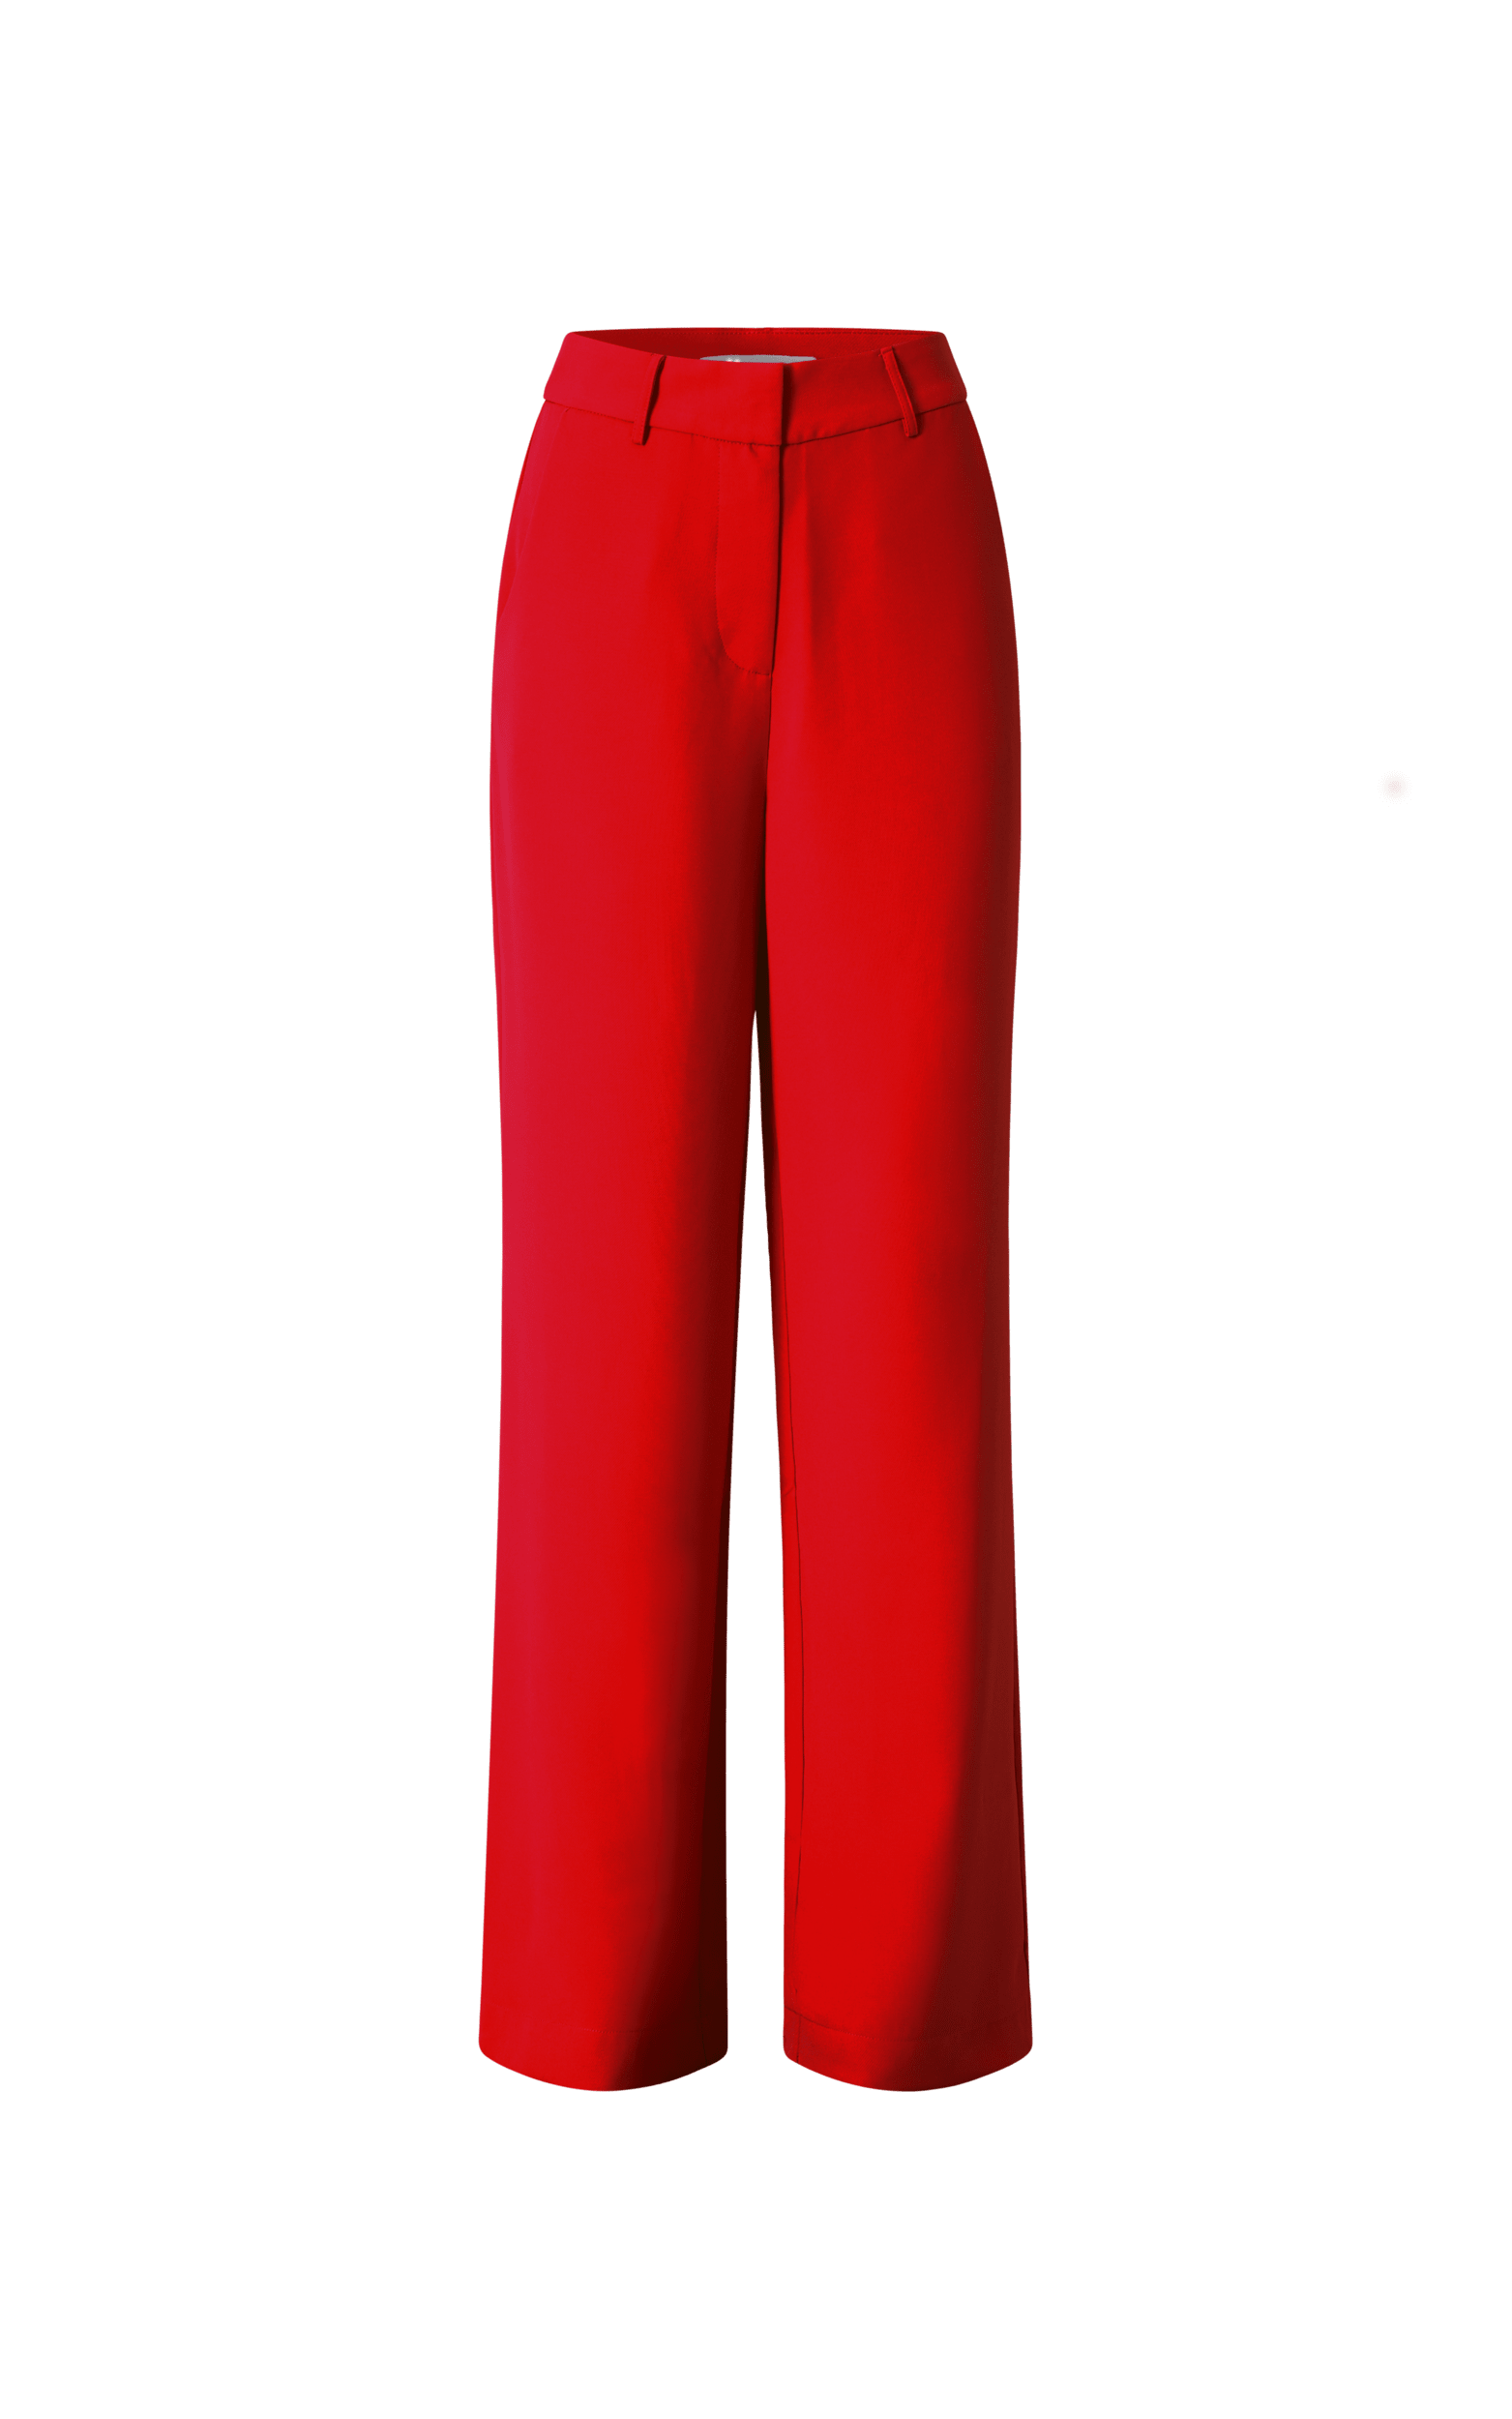 Red Wide Leg Pants With High Front Slit, Red High Waist Palazzo